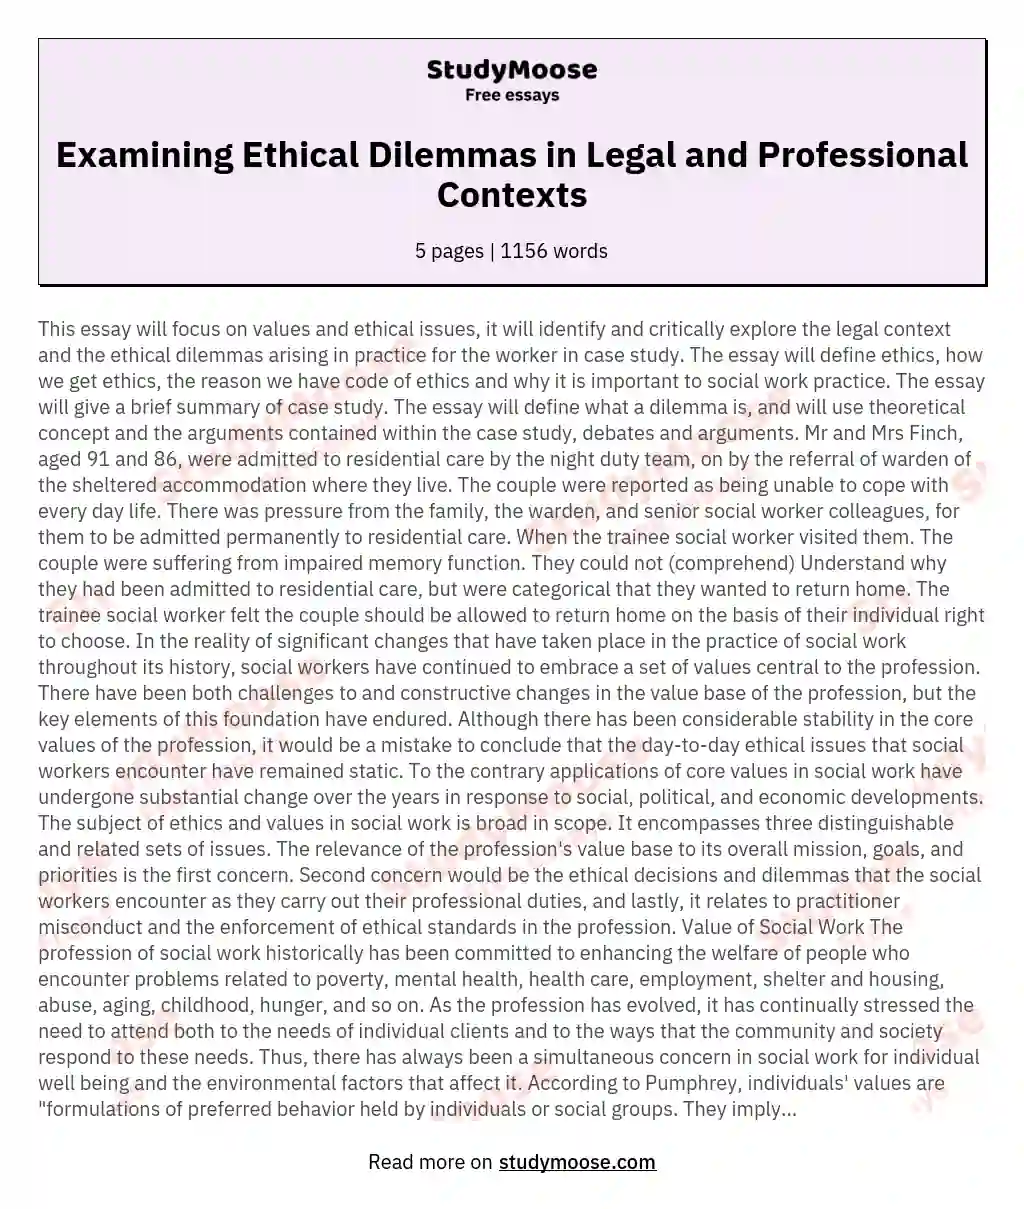 Examining Ethical Dilemmas in Legal and Professional Contexts essay